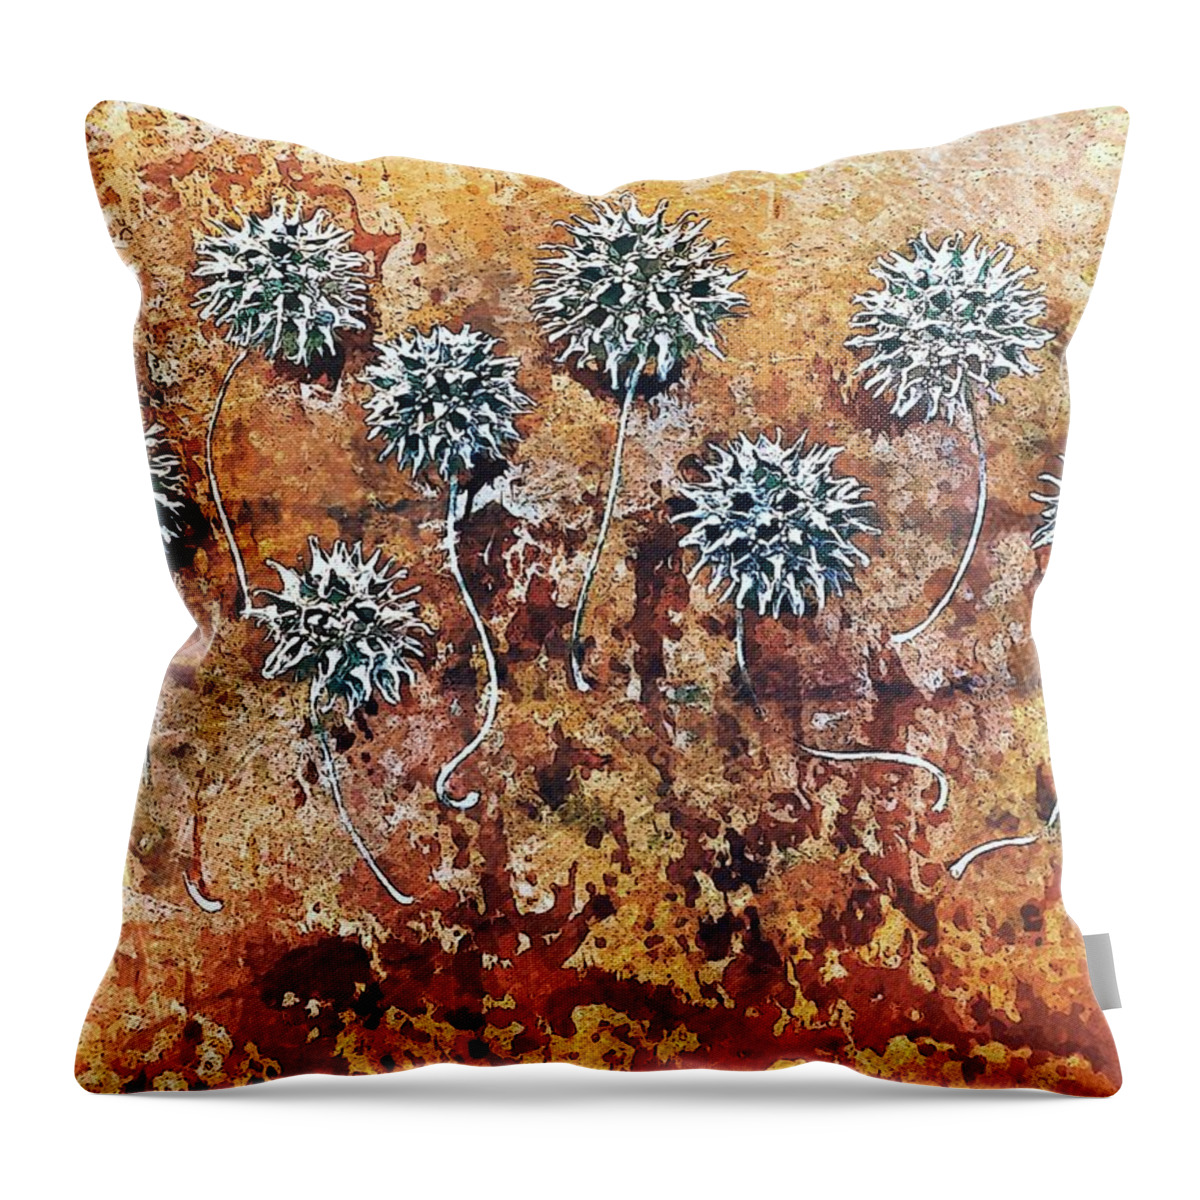 Seeds Throw Pillow featuring the digital art Nature Abstract 90 by Maria Huntley